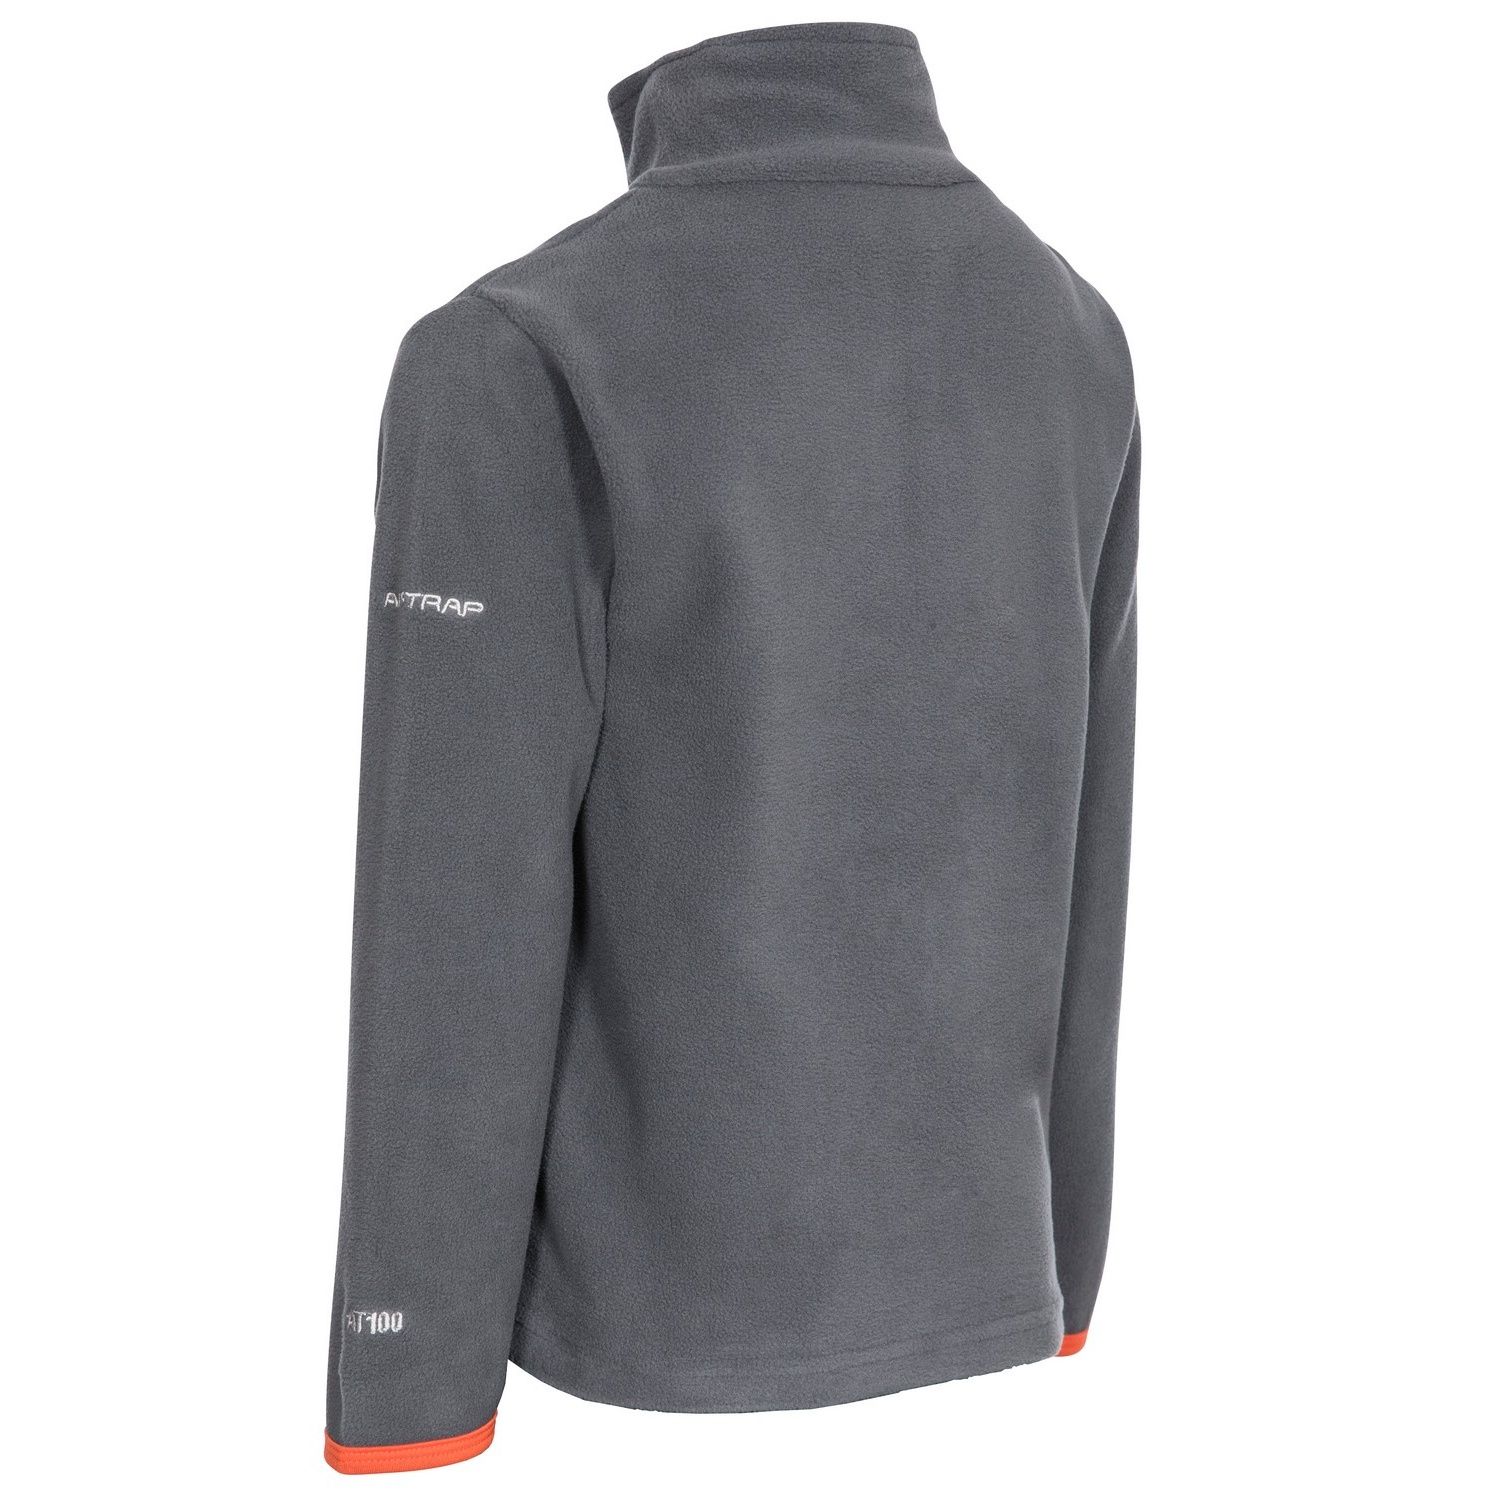 Airtrap. 1/2 Zip in Contrast Colour. Contrast Binding on Cuffs. Contrast Facing on Inner Collar. 100% Polyester Microfleece. Trespass Childrens Chest Sizing (approx): 2/3 Years - 21in/53cm, 3/4 Years - 22in/56cm, 5/6 Years - 24in/61cm, 7/8 Years - 26in/66cm, 9/10 Years - 28in/71cm, 11/12 Years - 31in/79cm.